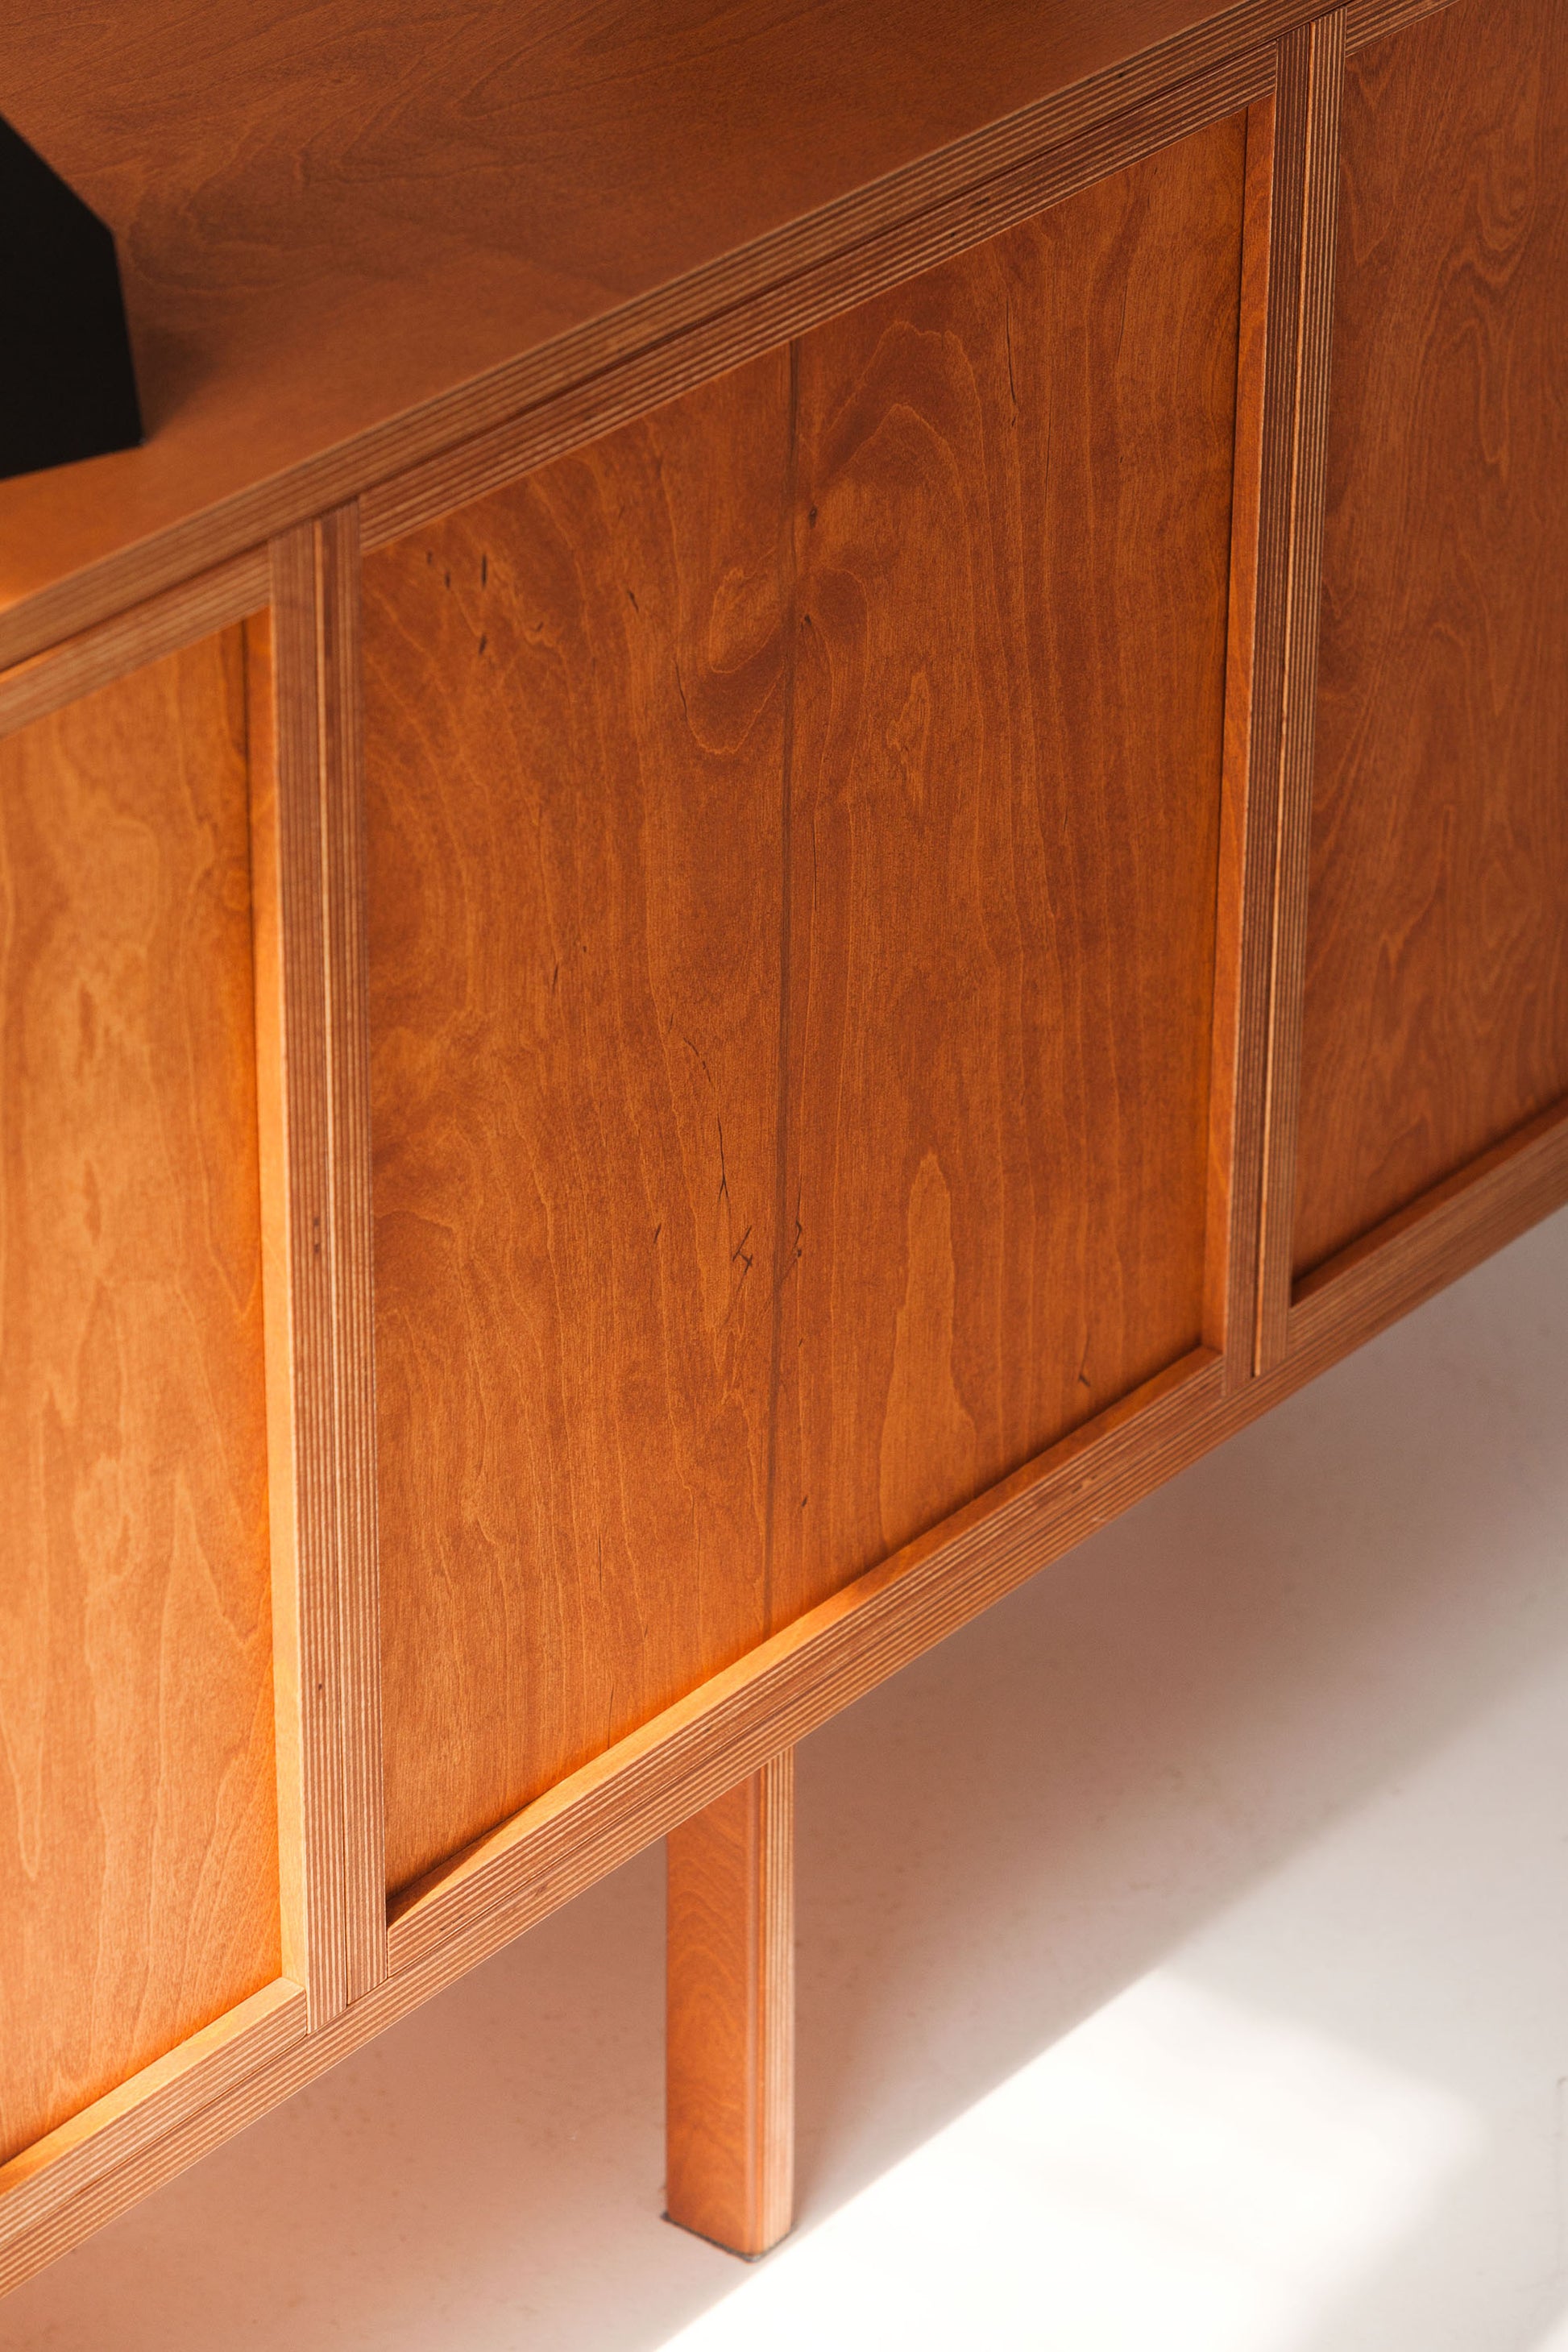 back-of-the-wooden-teak-media-console-with-drawers-and-vinyl-storage